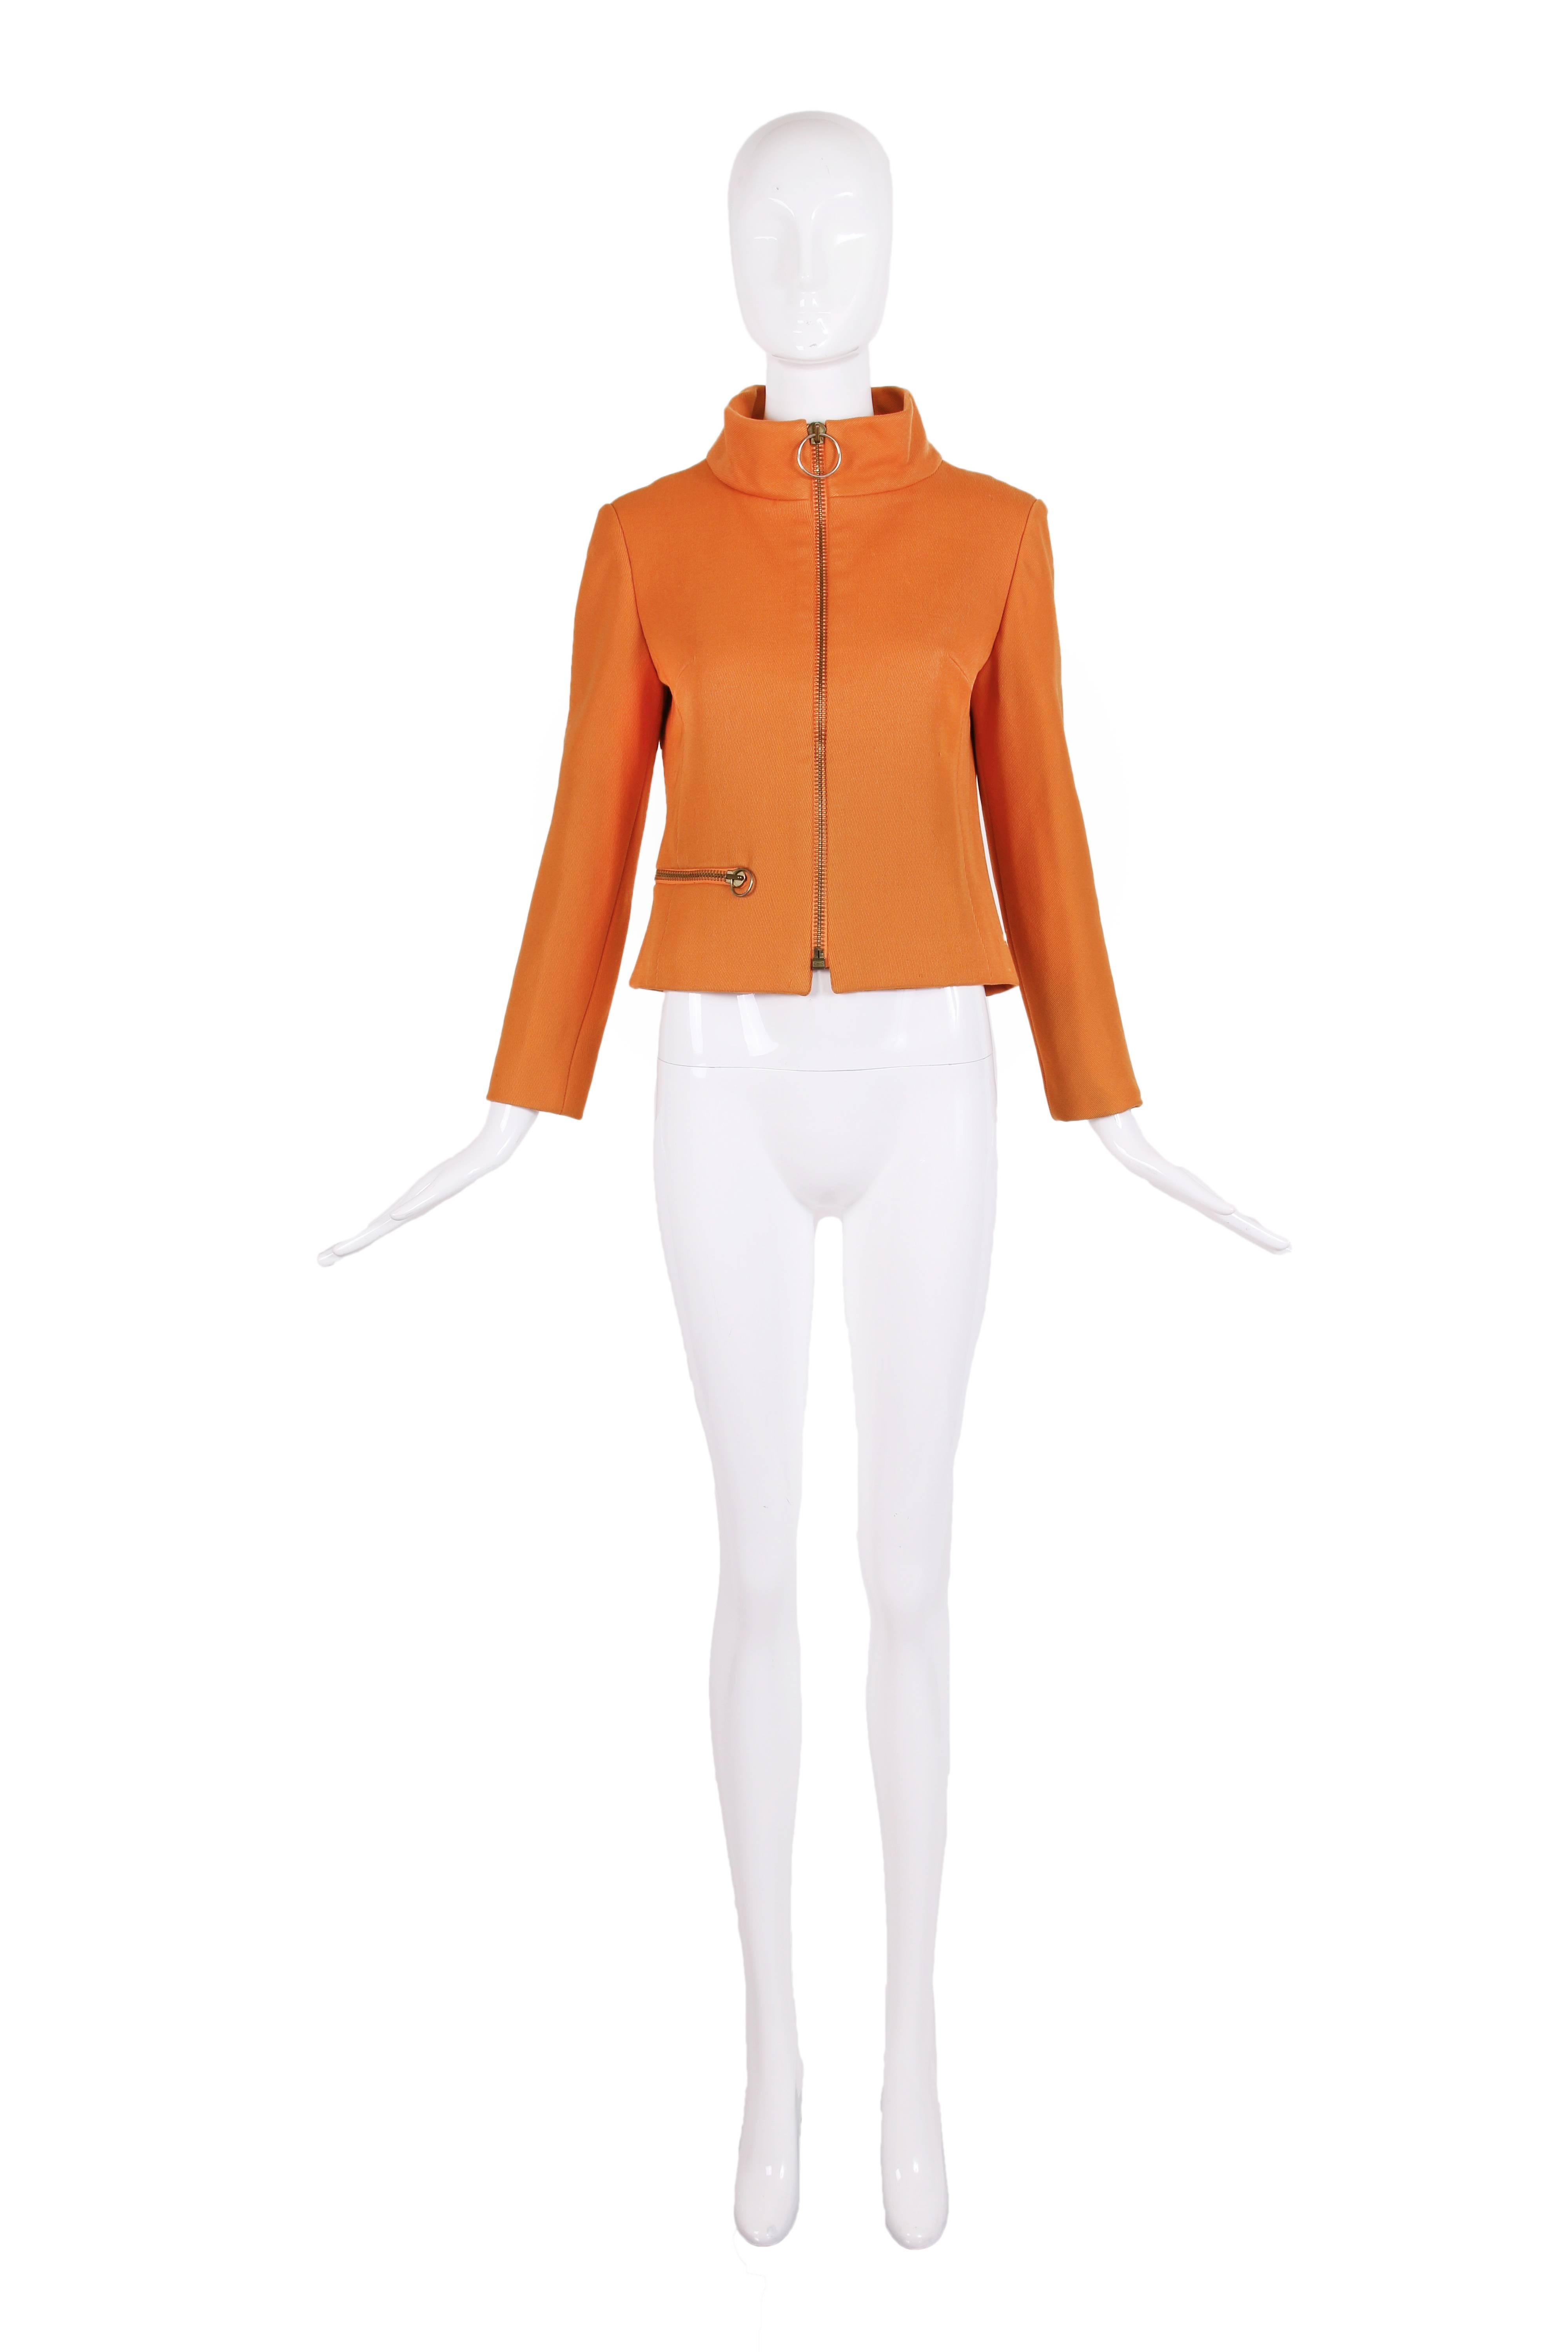 Important circa 1964 Pierre Cardin 'Cosmos Collection' burnt orange wool unisex jacket. See listing photos for original editorial image. Jacket has classic 